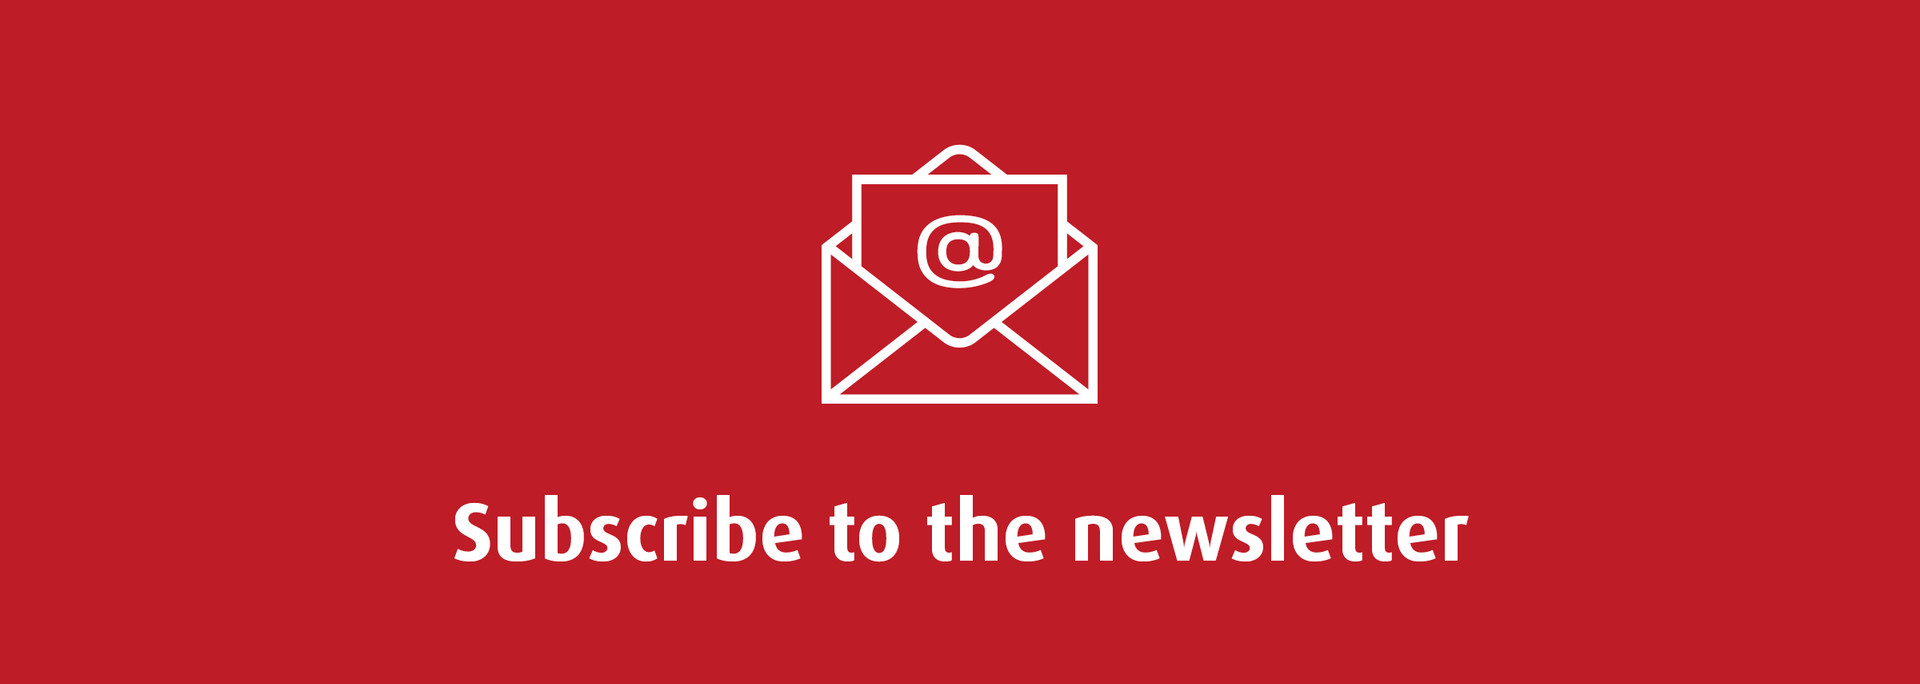 Dethleffs Newsletter  Want to learn more about caravanning and Dethleffs?